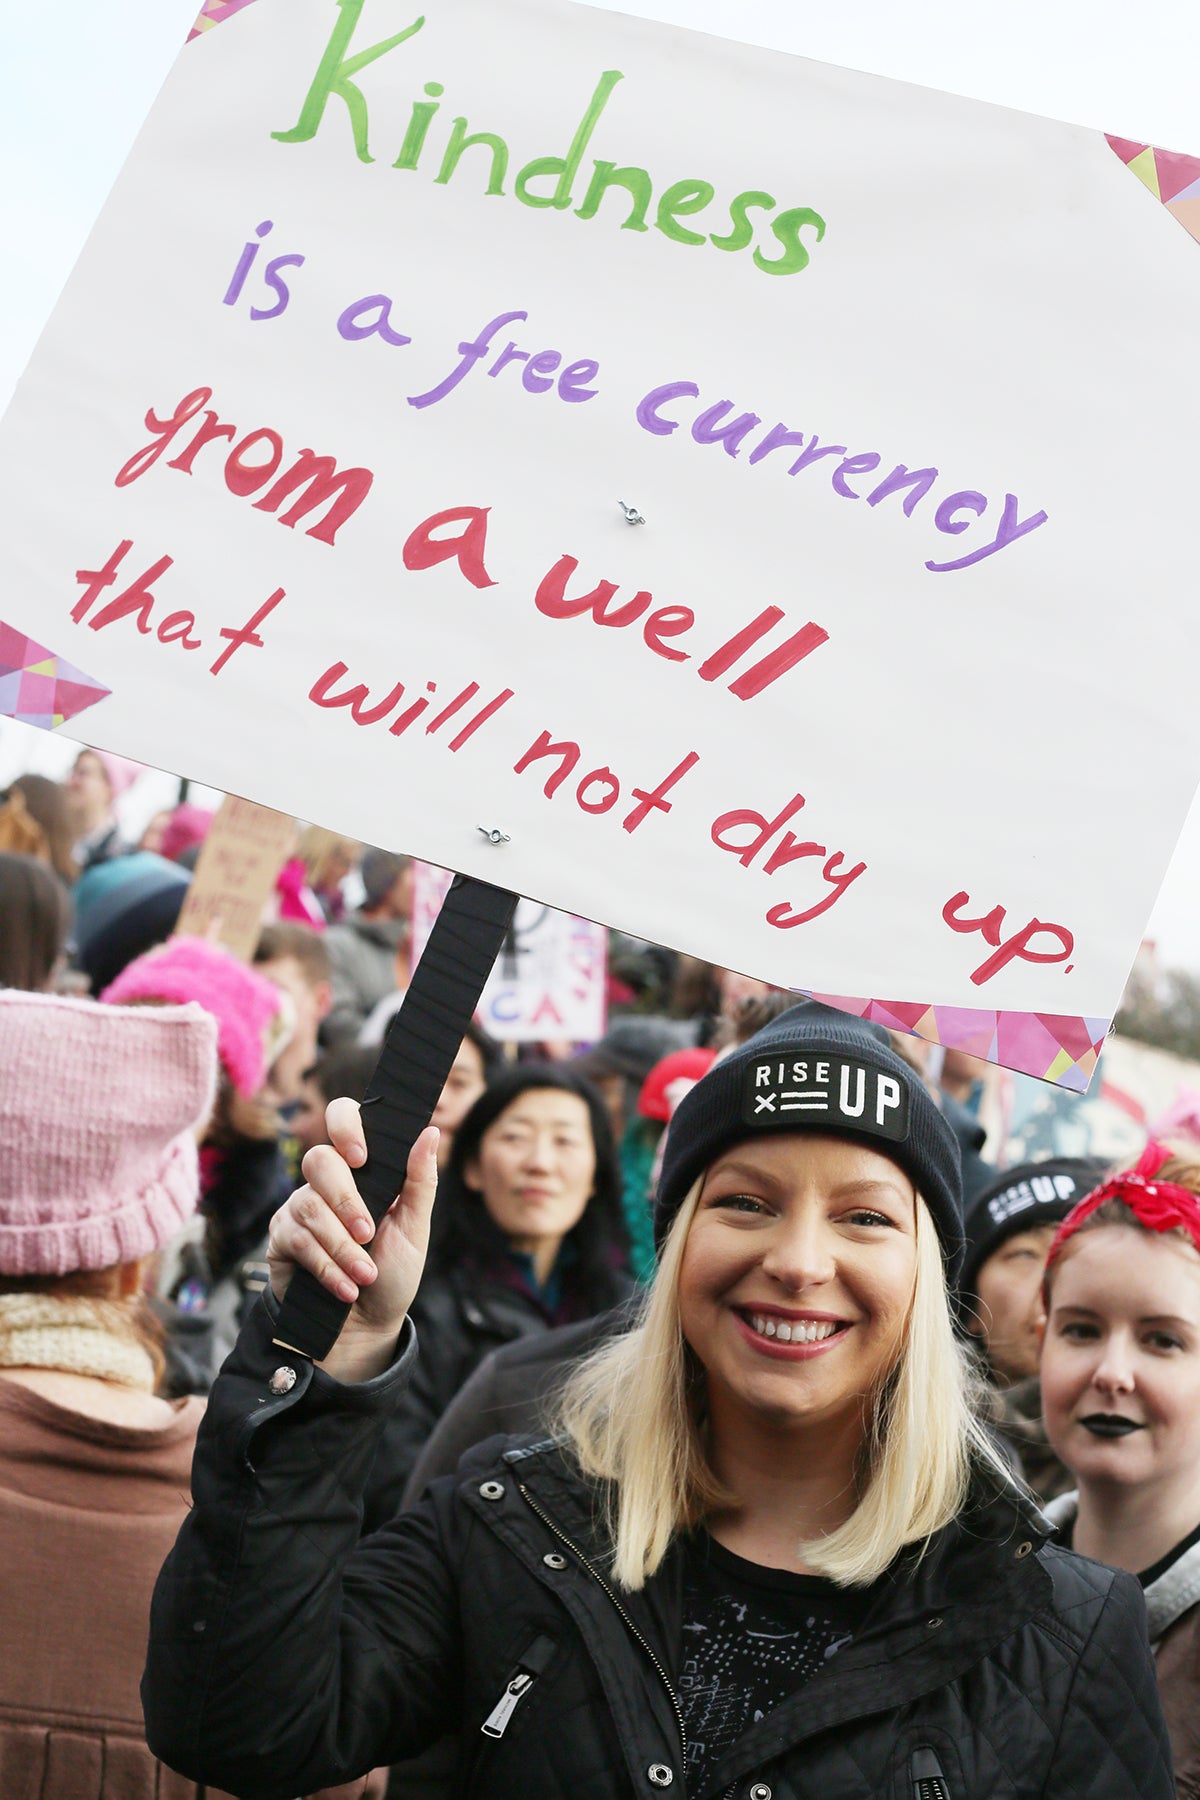 Seattle Women's March 2017  Kindness is a free currency